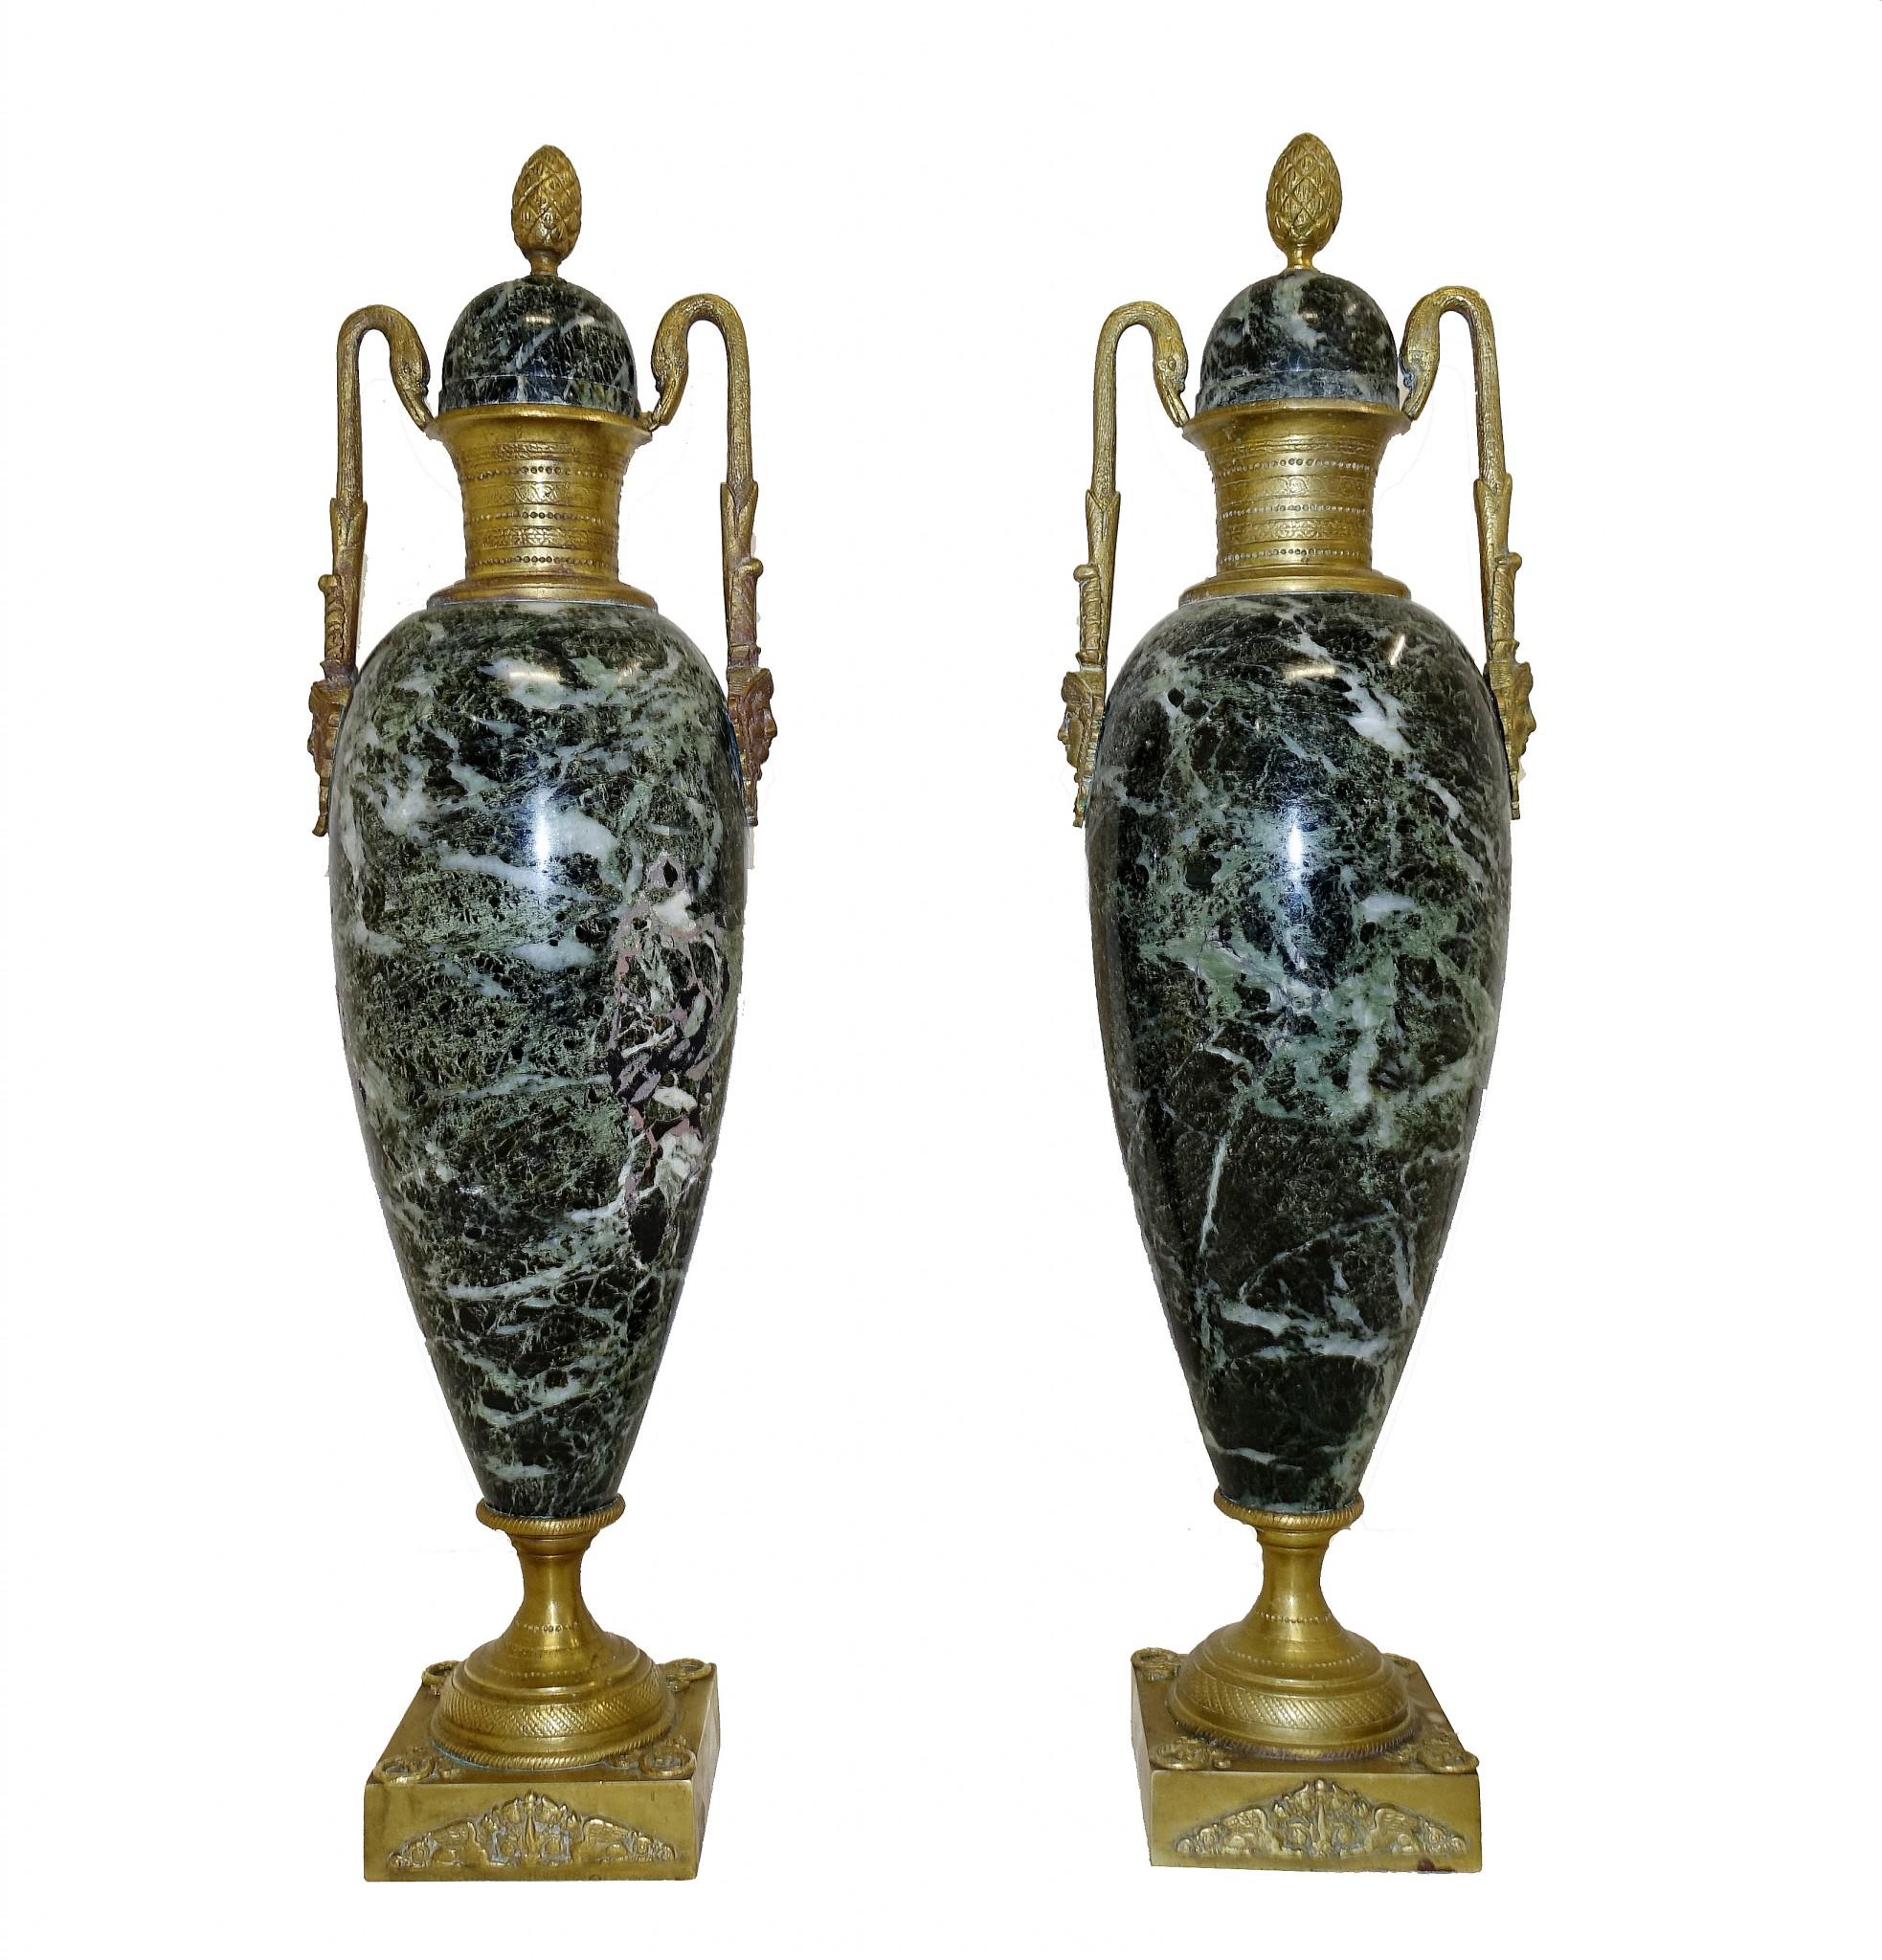 Elegant pair of French antique cassolettes or marble urns
Great pair of classical amphora form, highly decorative and collectable
Features original ormolu fixtures including pineapple finials and swan neck handles
Circa 1880 on this pair in the